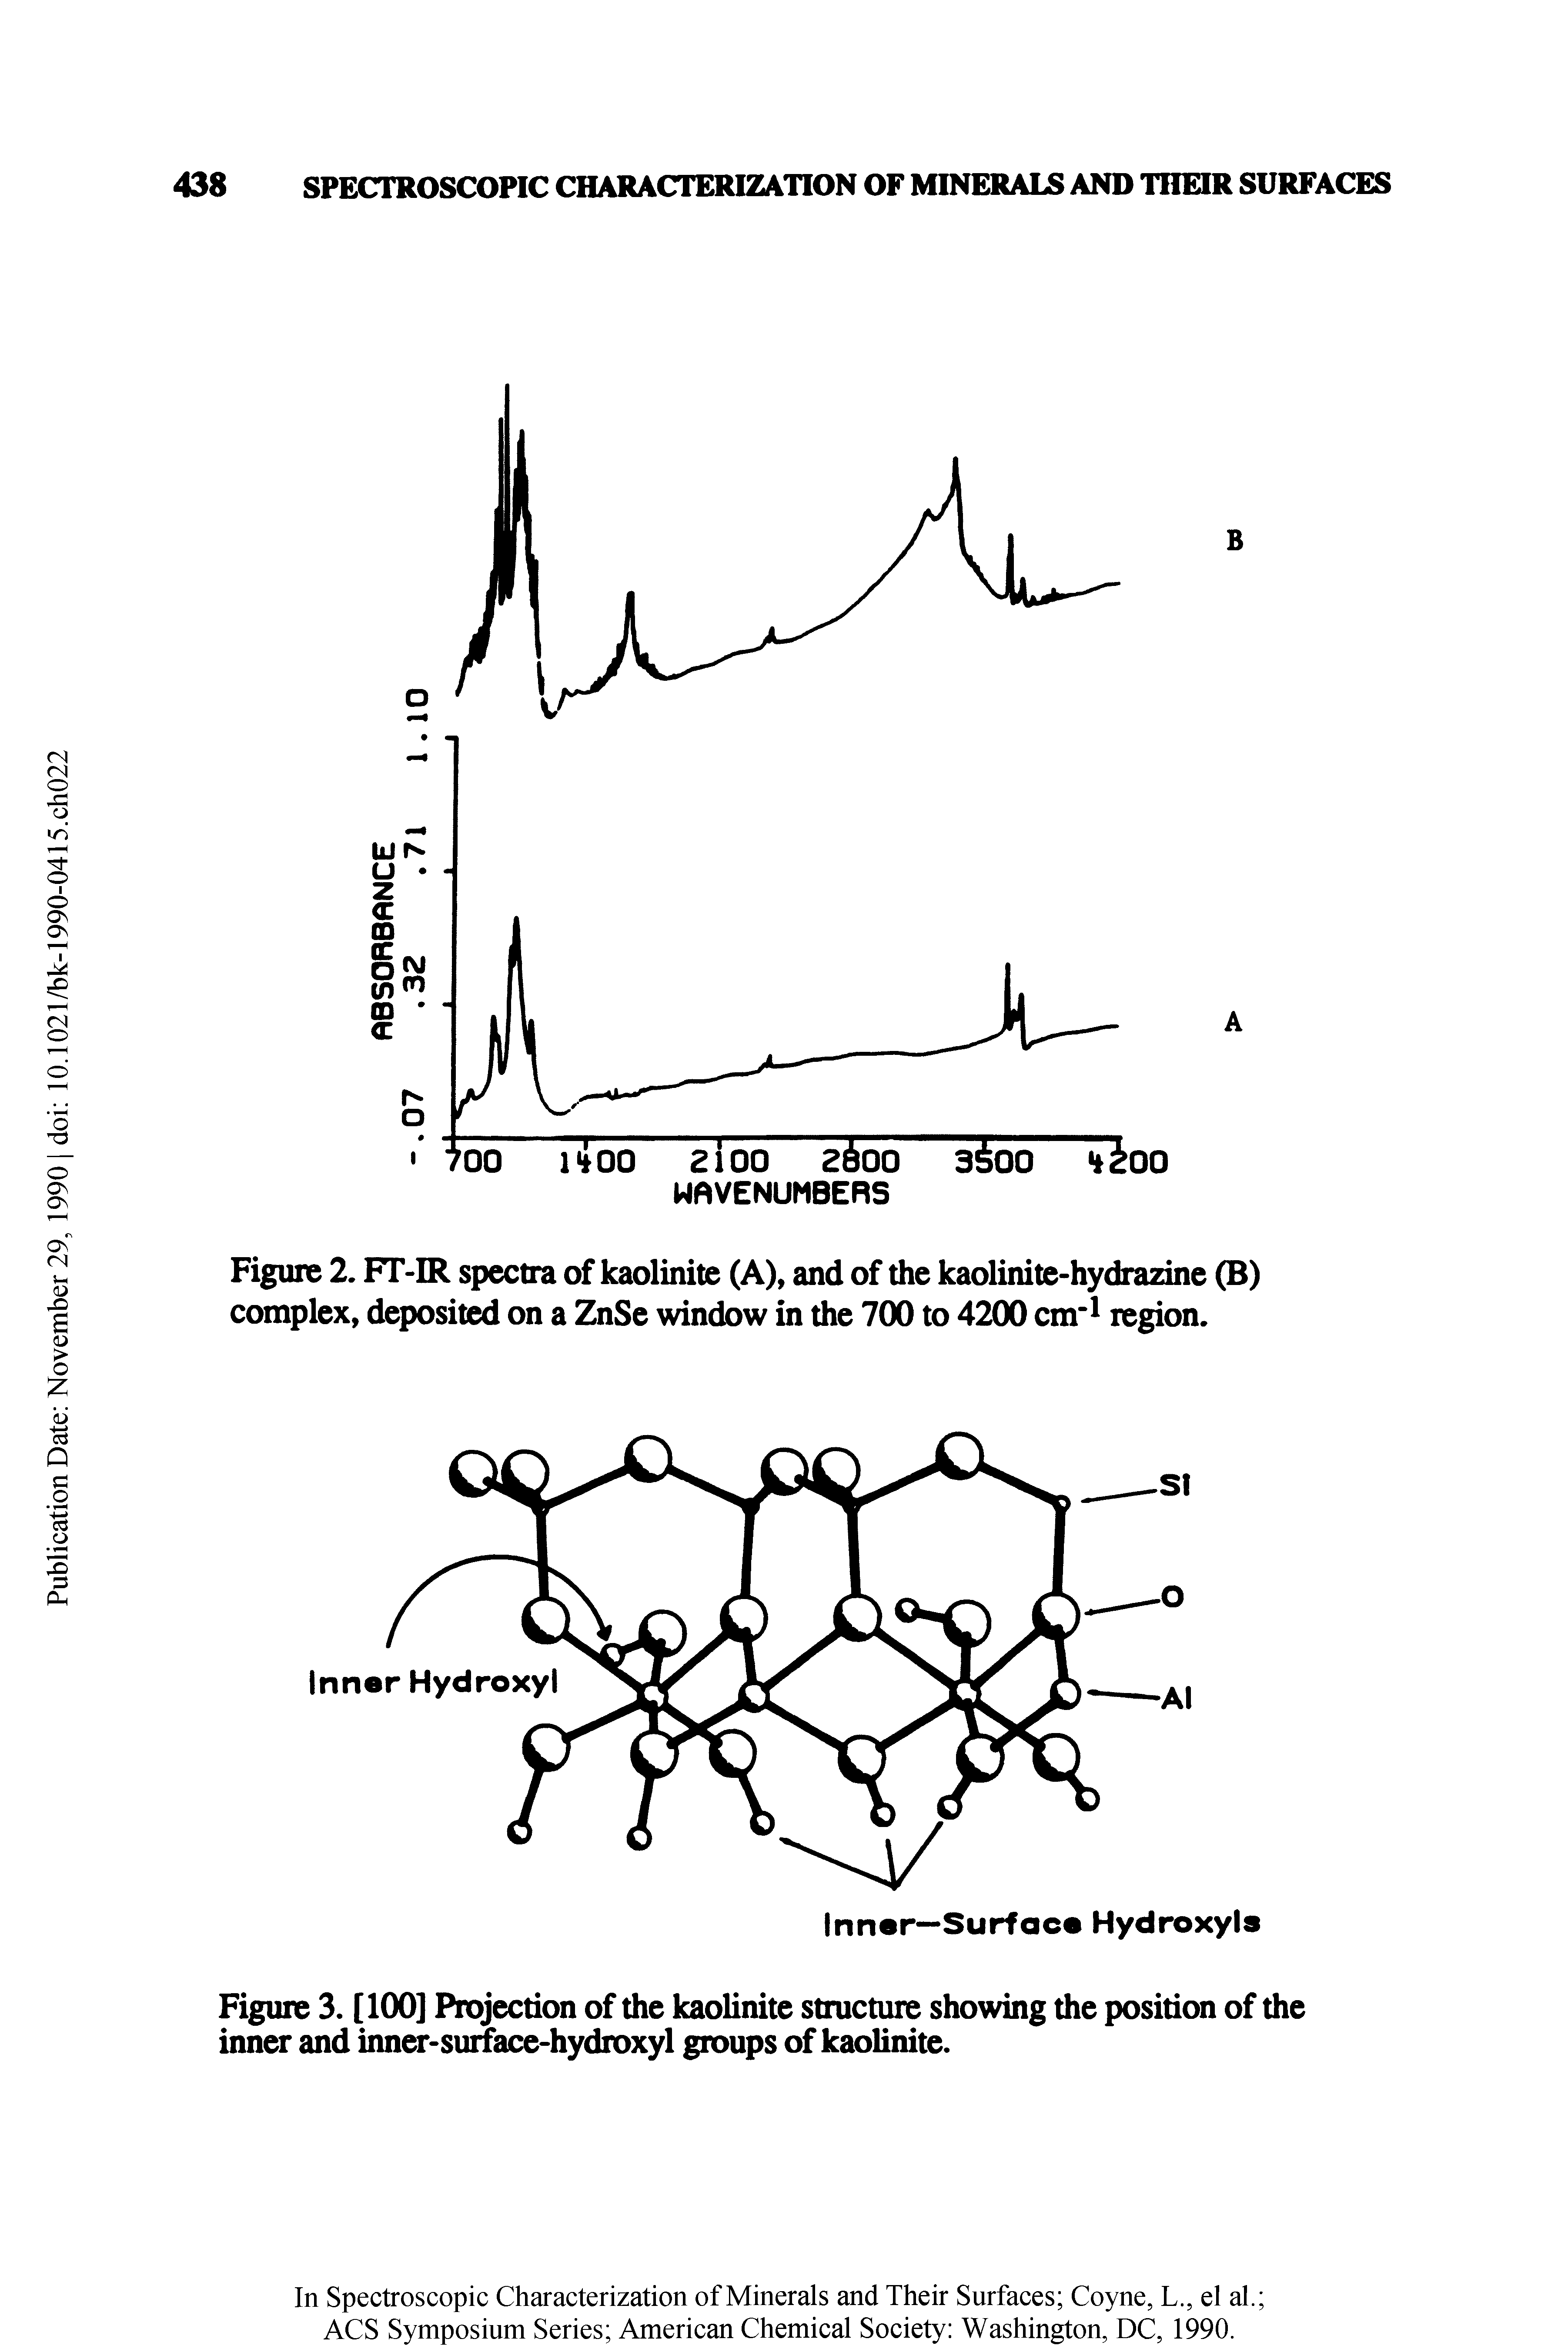 Figure 3. [100] Projection of the kaolinite structure showing the position of the inner and inner-surface-hydroxyl groups of kaolinite.